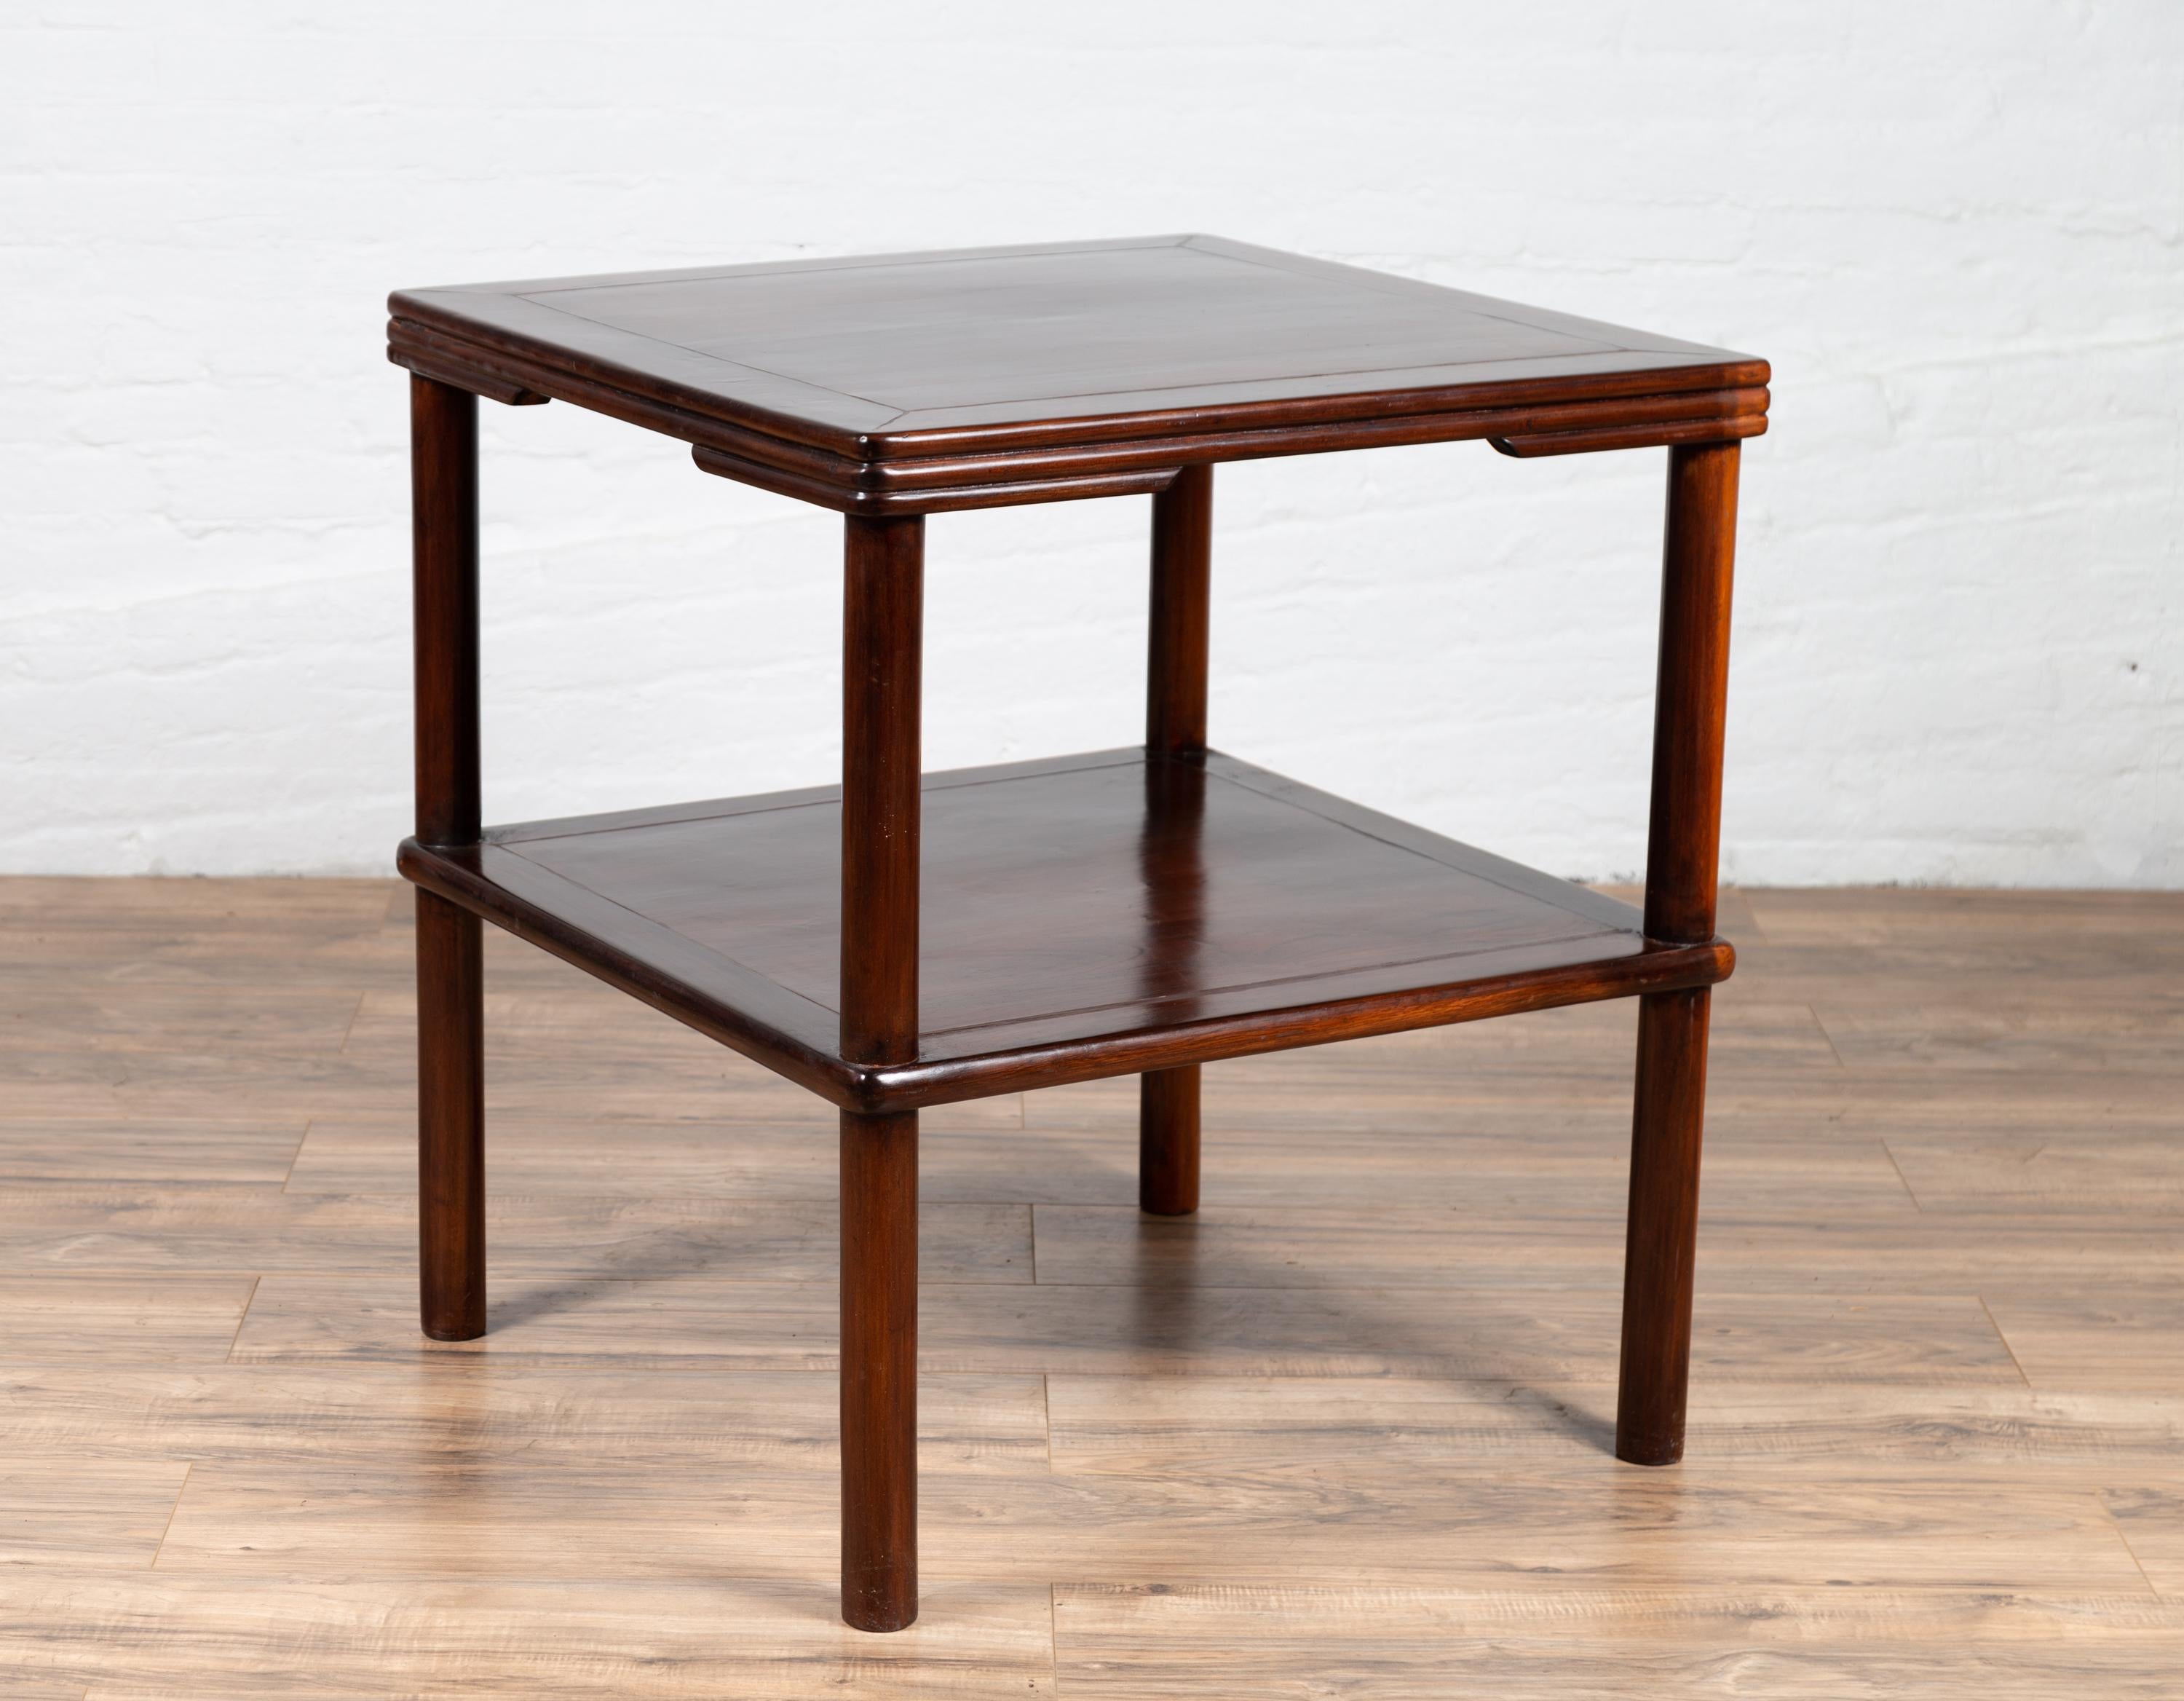 Chinese Vintage Midcentury Square-Shaped Side Table with Lower Shelf For Sale 4